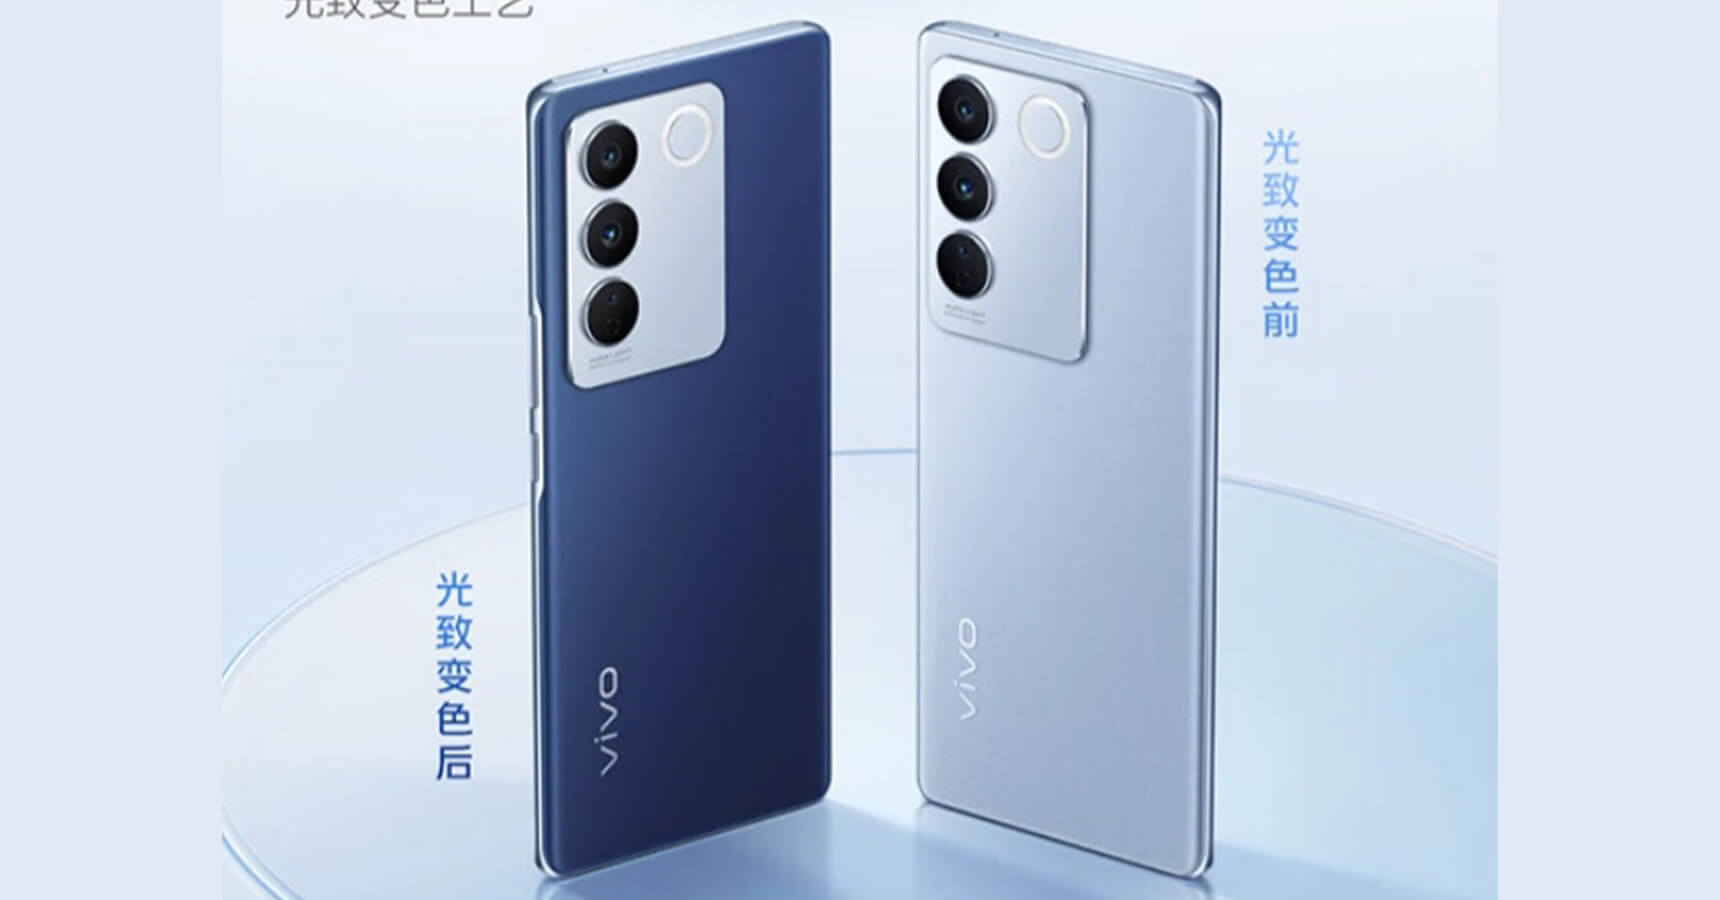 Vivo S16 Spring Blue option launched